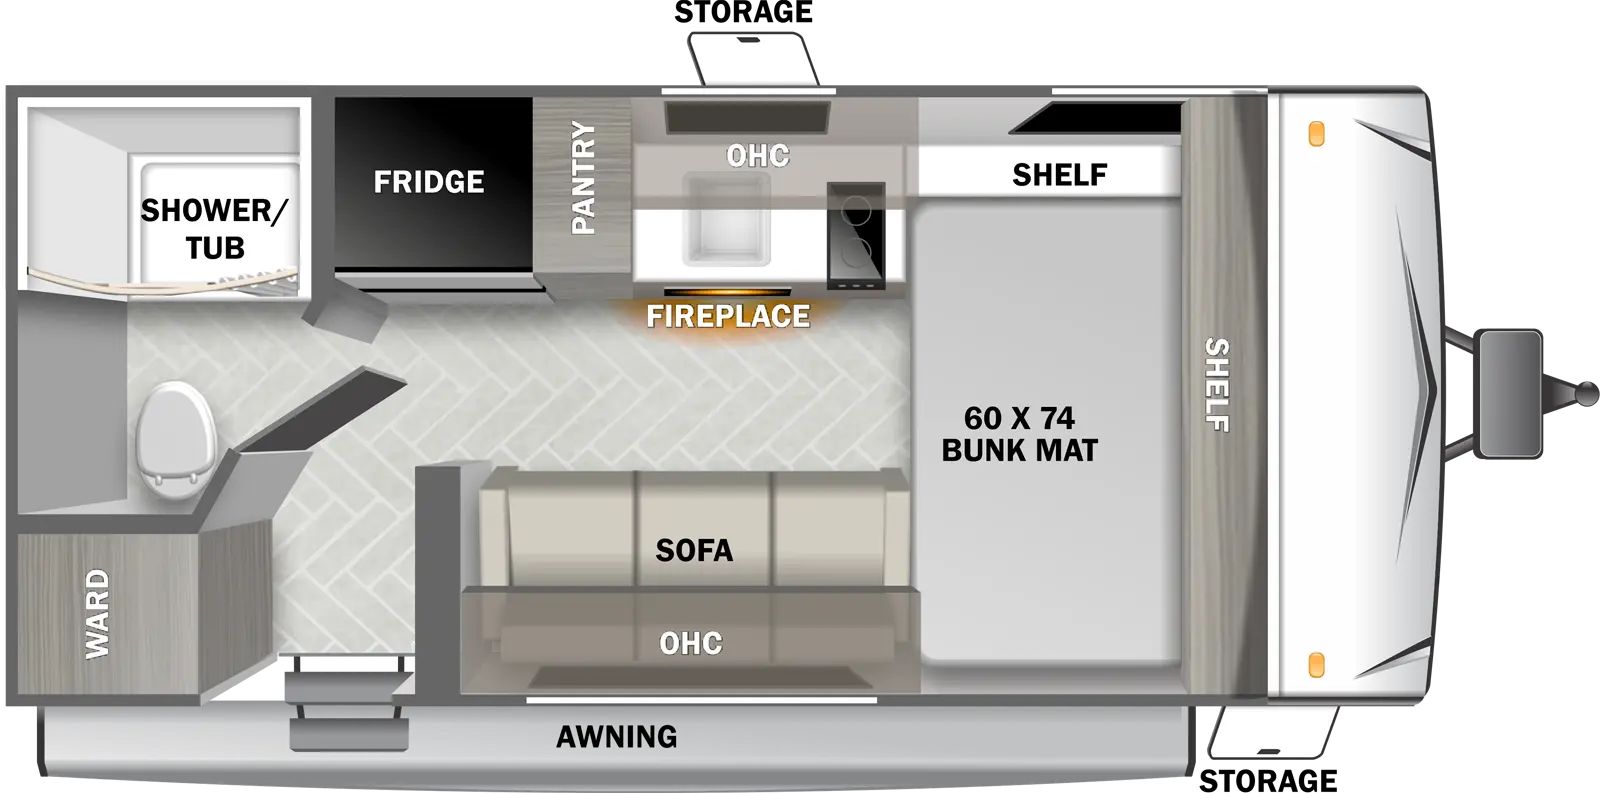 The 157FBCE has zero slideouts and one entry. Exterior features an awning and storage. Interior layout front to back: side-facing bunk mat with shelf along front wall and off-door side; door side sofa and overhead cabinet, and entry door; off-door side kitchen counter with cooktop, sink, overhead cabinet, pantry and refrigerator; rear wardrobe, and bathroom with toilet and shower/tub only.